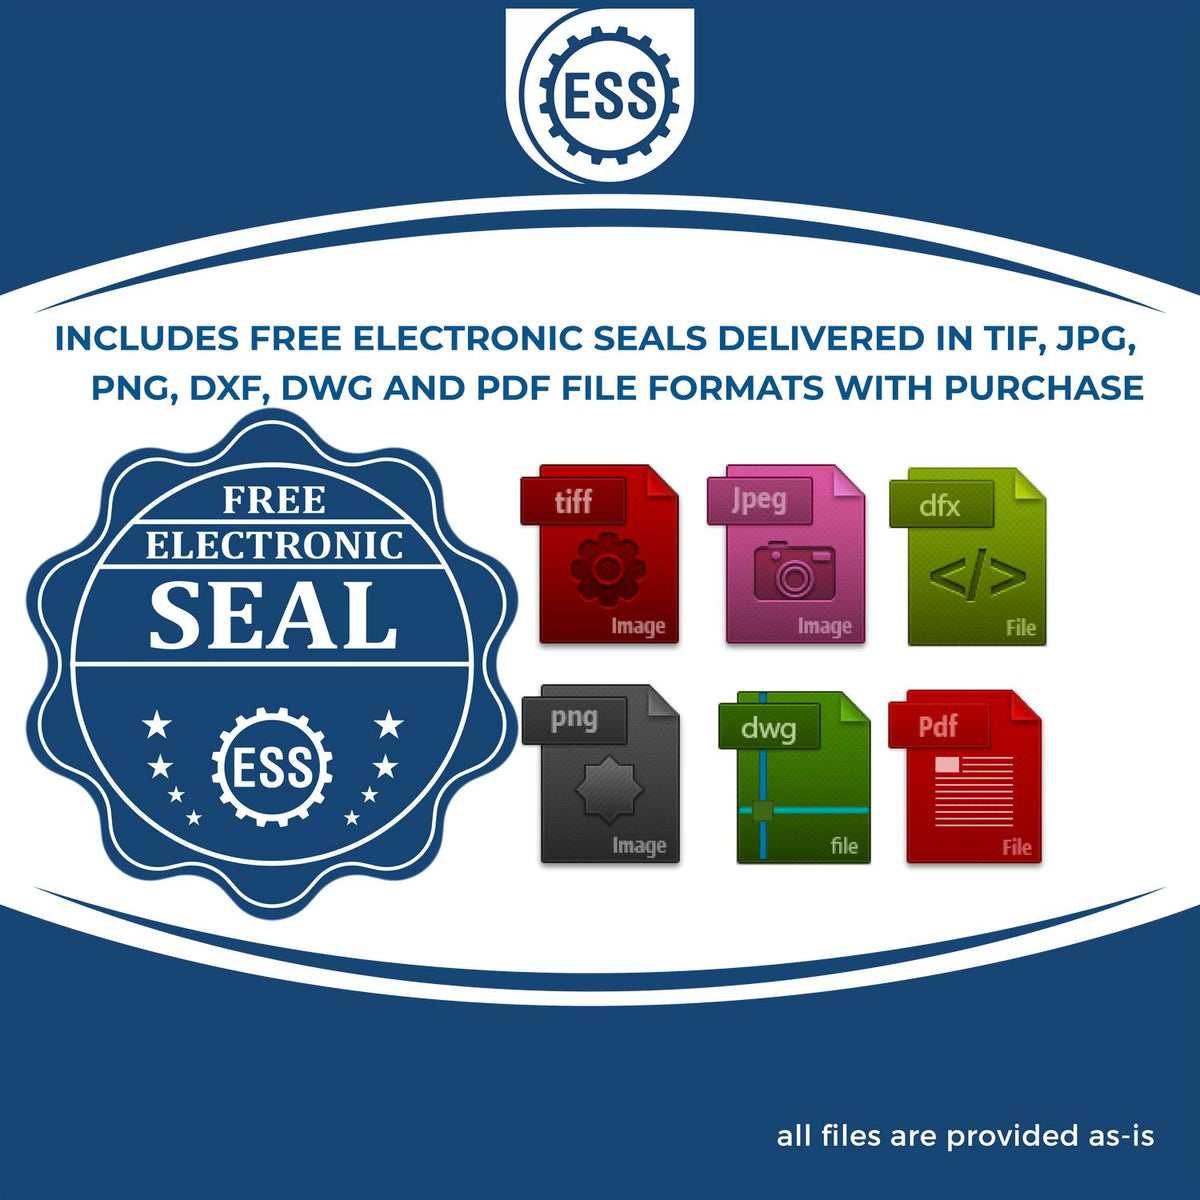 An infographic for the free electronic seal for the Premium MaxLight Pre-Inked Arkansas Engineering Stamp illustrating the different file type icons such as DXF, DWG, TIF, JPG and PNG.